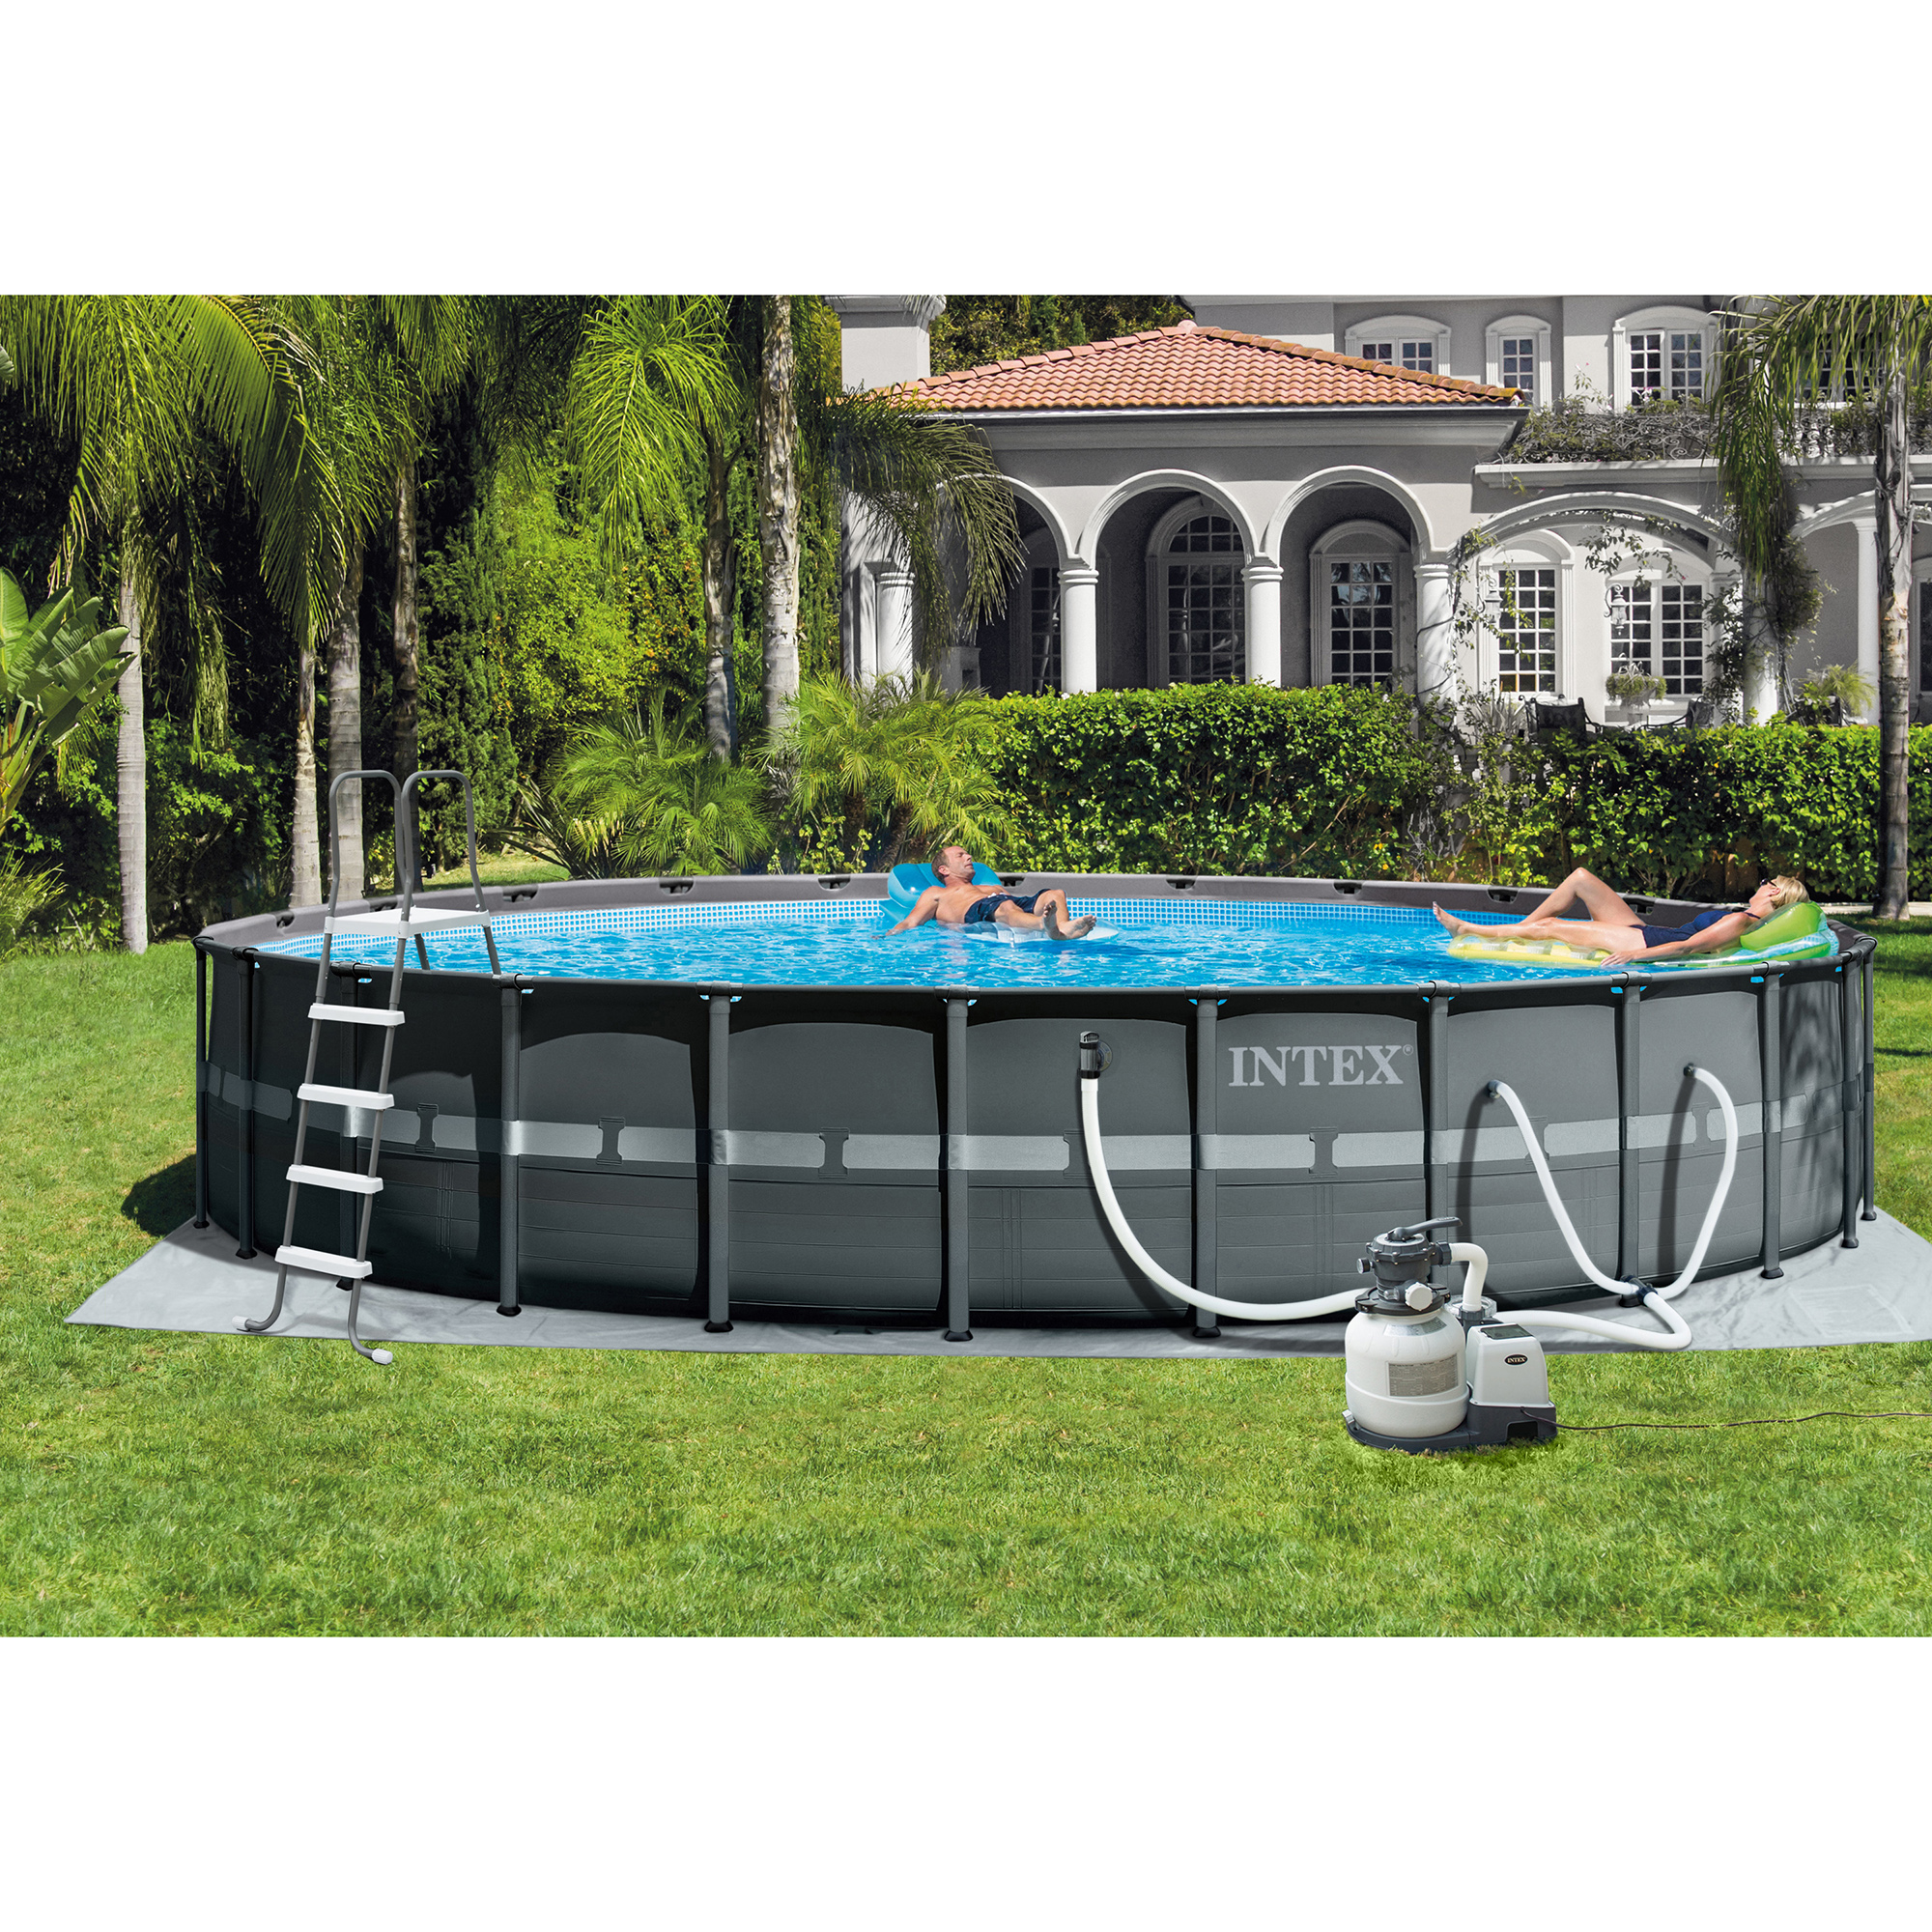 Intex 26' x 52" Ultra Frame Above Ground Swimming Pool Set with Pump